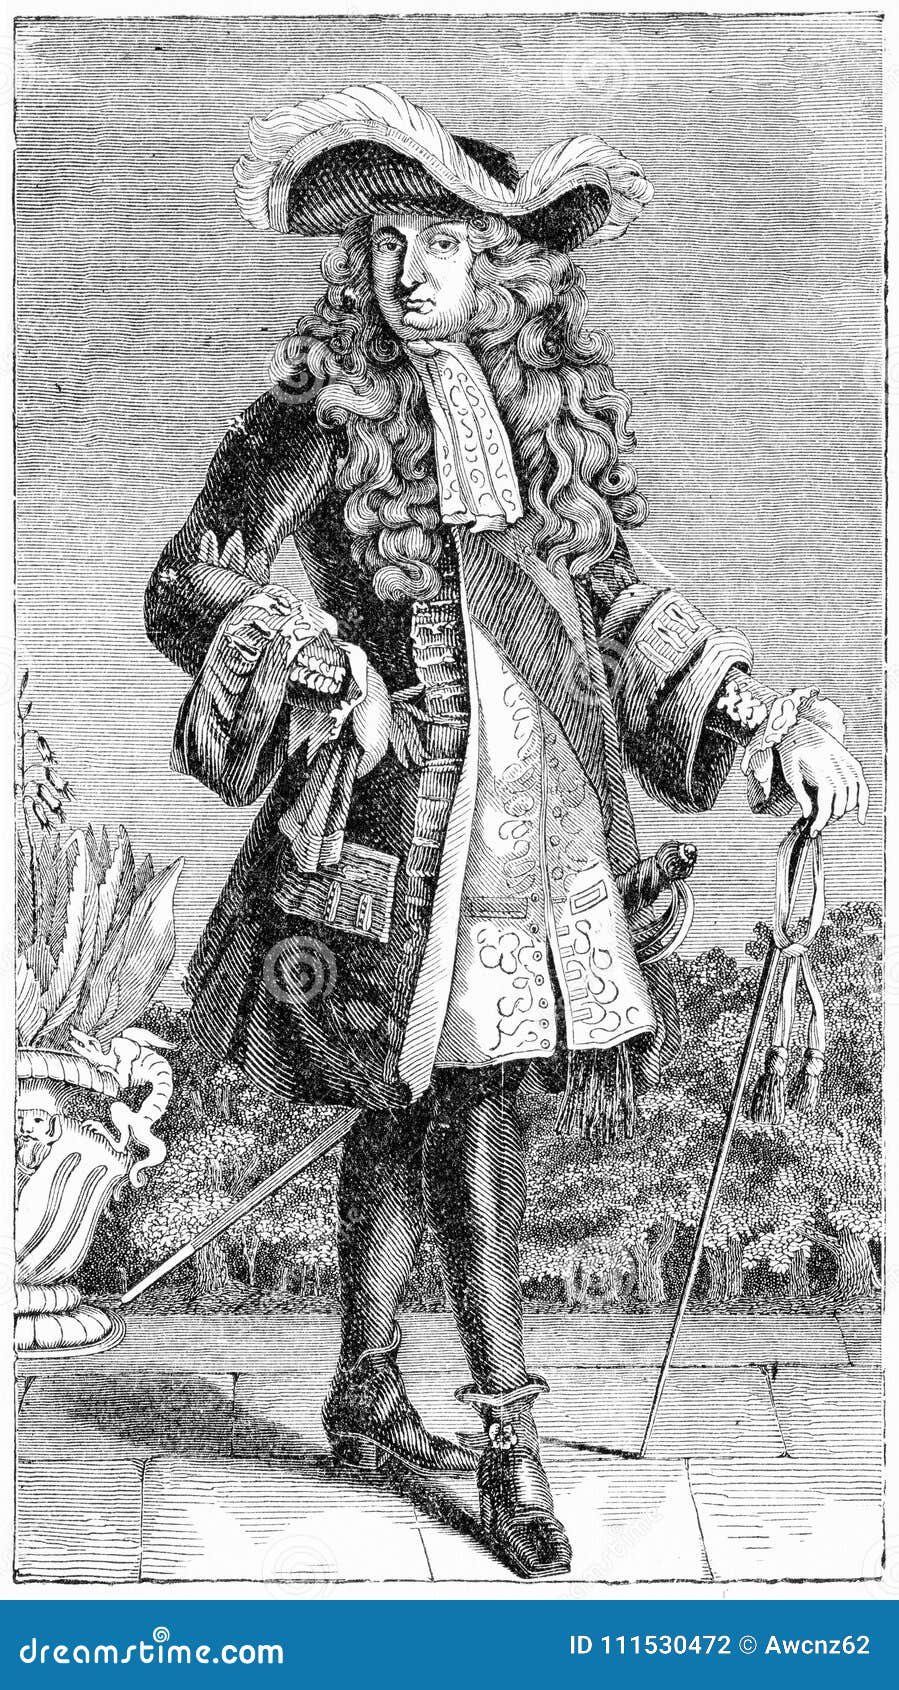 engraving of the french king, louis xiv